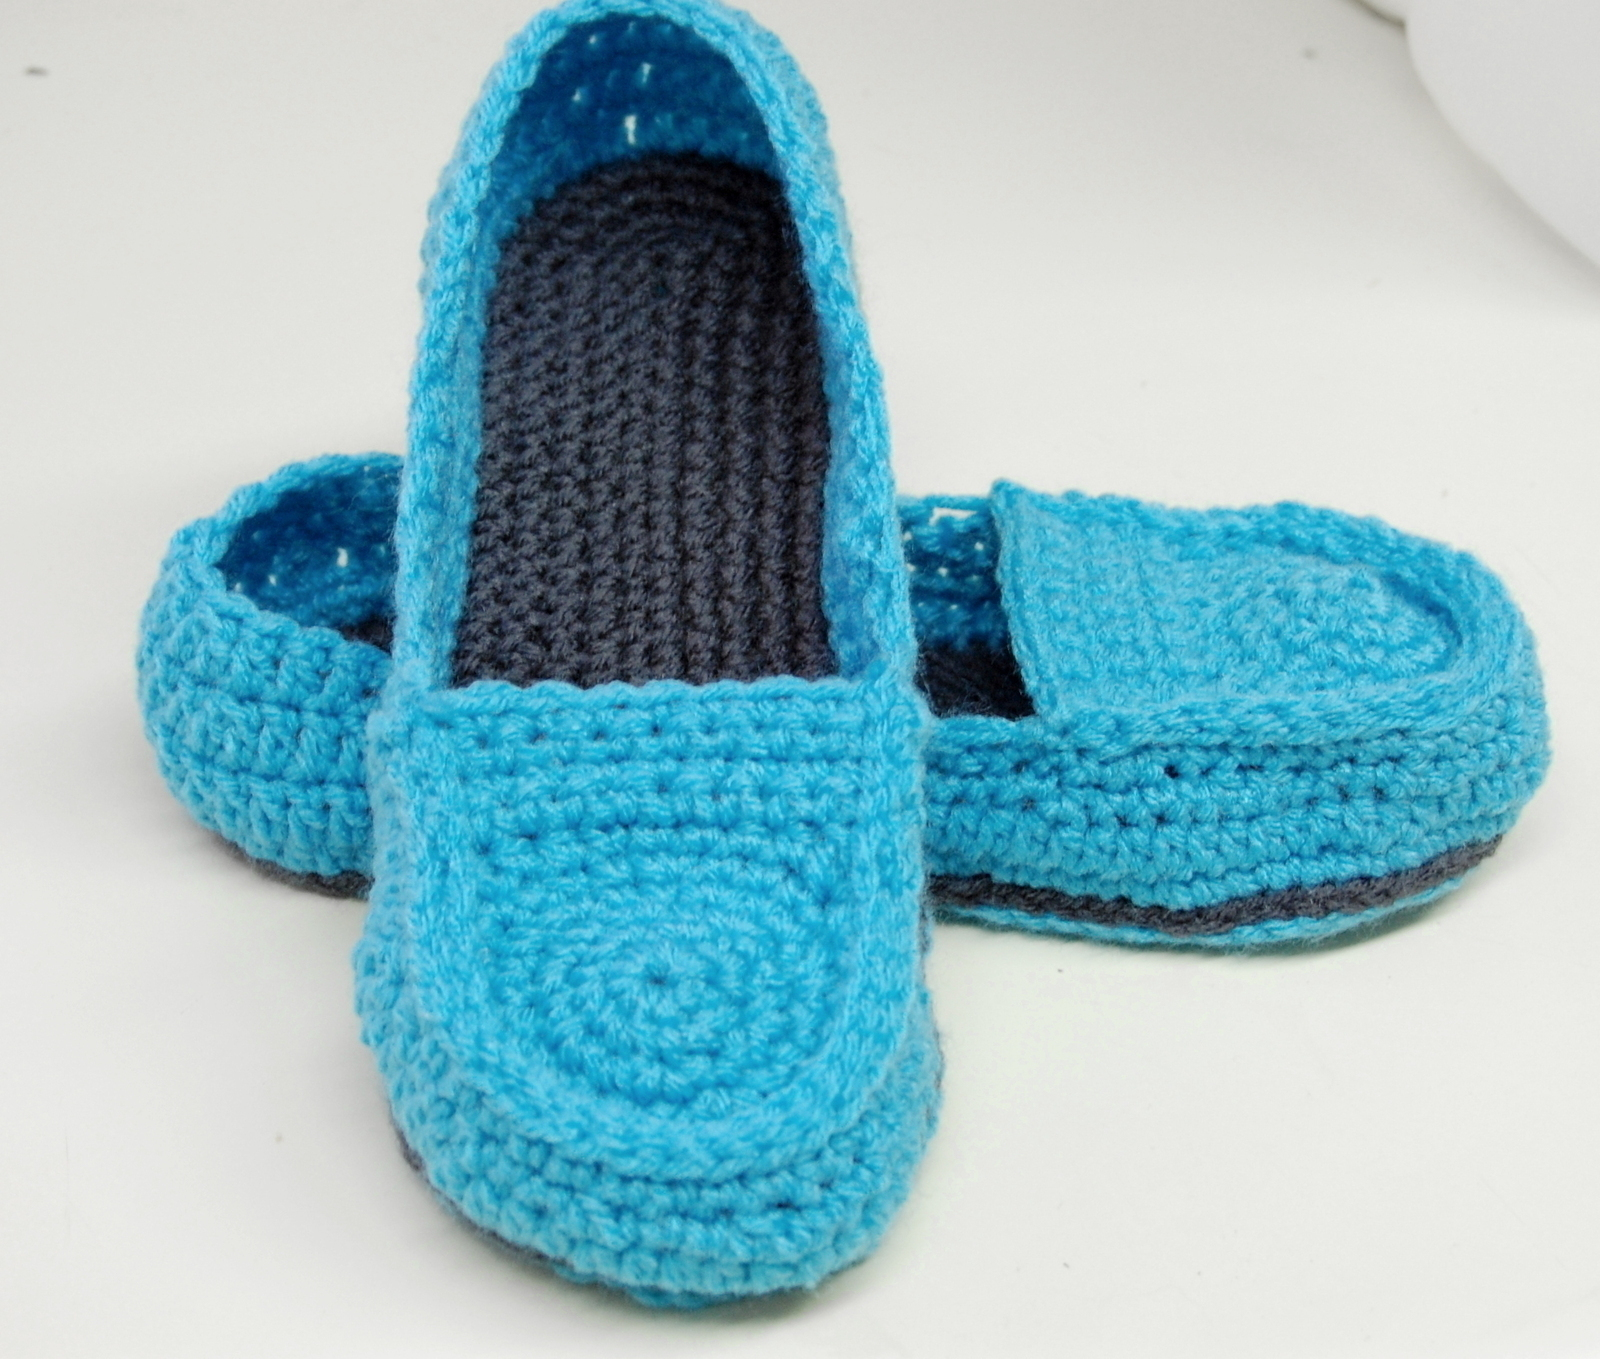 Crochet Slippers Pattern Free Crochet Pattern Womens Loafer Slippers A Pair Of Knit Or